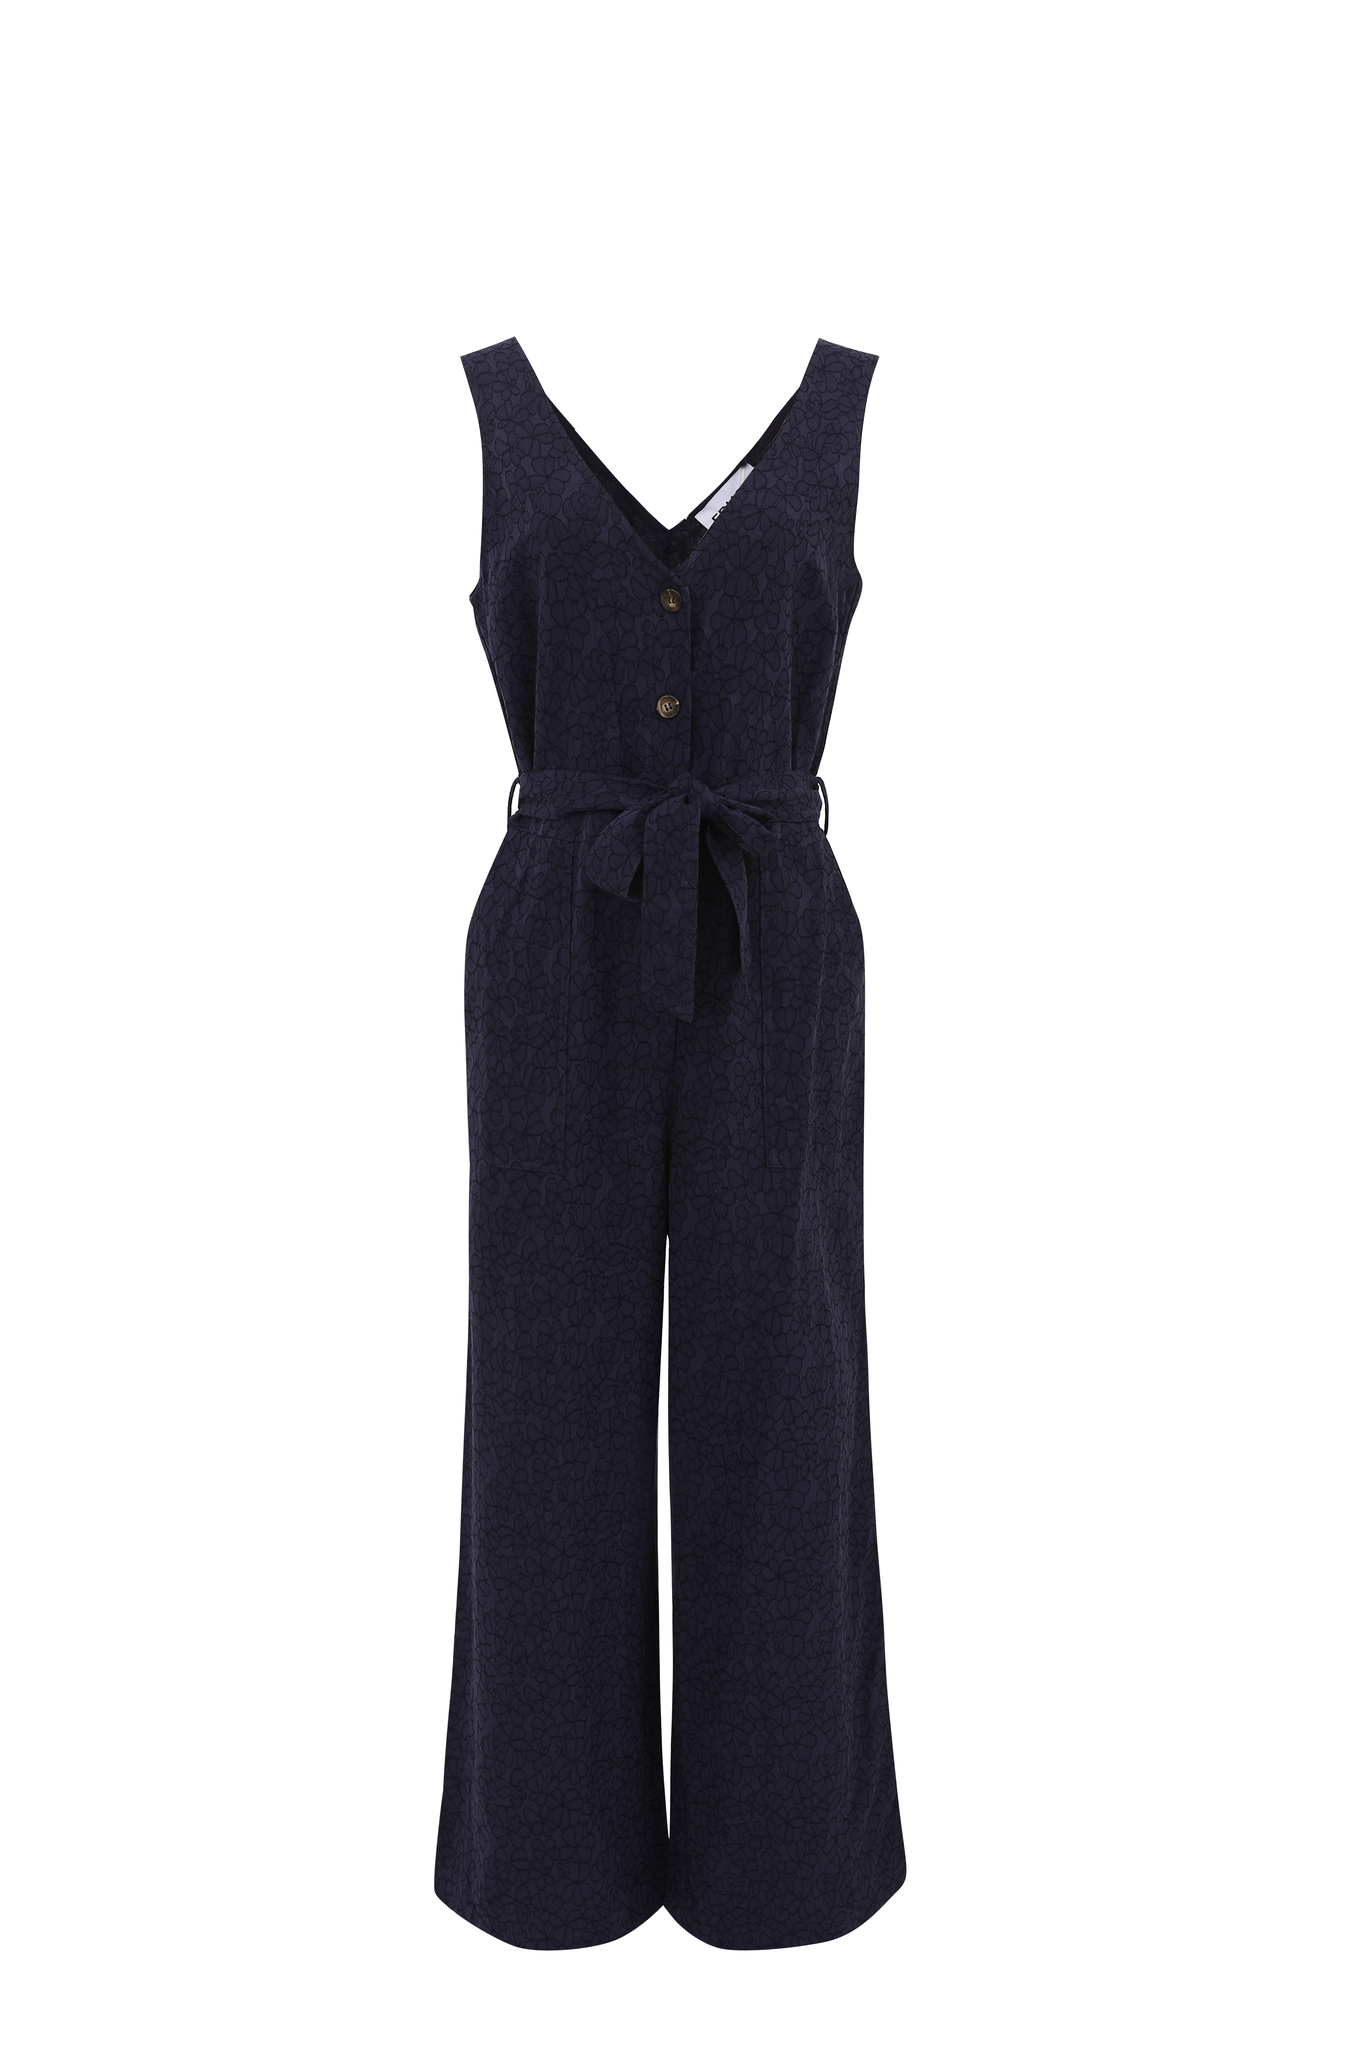 A beautiful summer jumpsuit in a fabulous embossed fabric from FRNCH. The perfect piece for a summer wedding or worn casually with trainers. The V neck is front and back so very elegant . It buttons from the V to the waist with large contrasting buttons and has a tie belt. There are patch pockets to the front. The fit is true to size. It is a wide leg piece. Fabric is an embossed floral print.